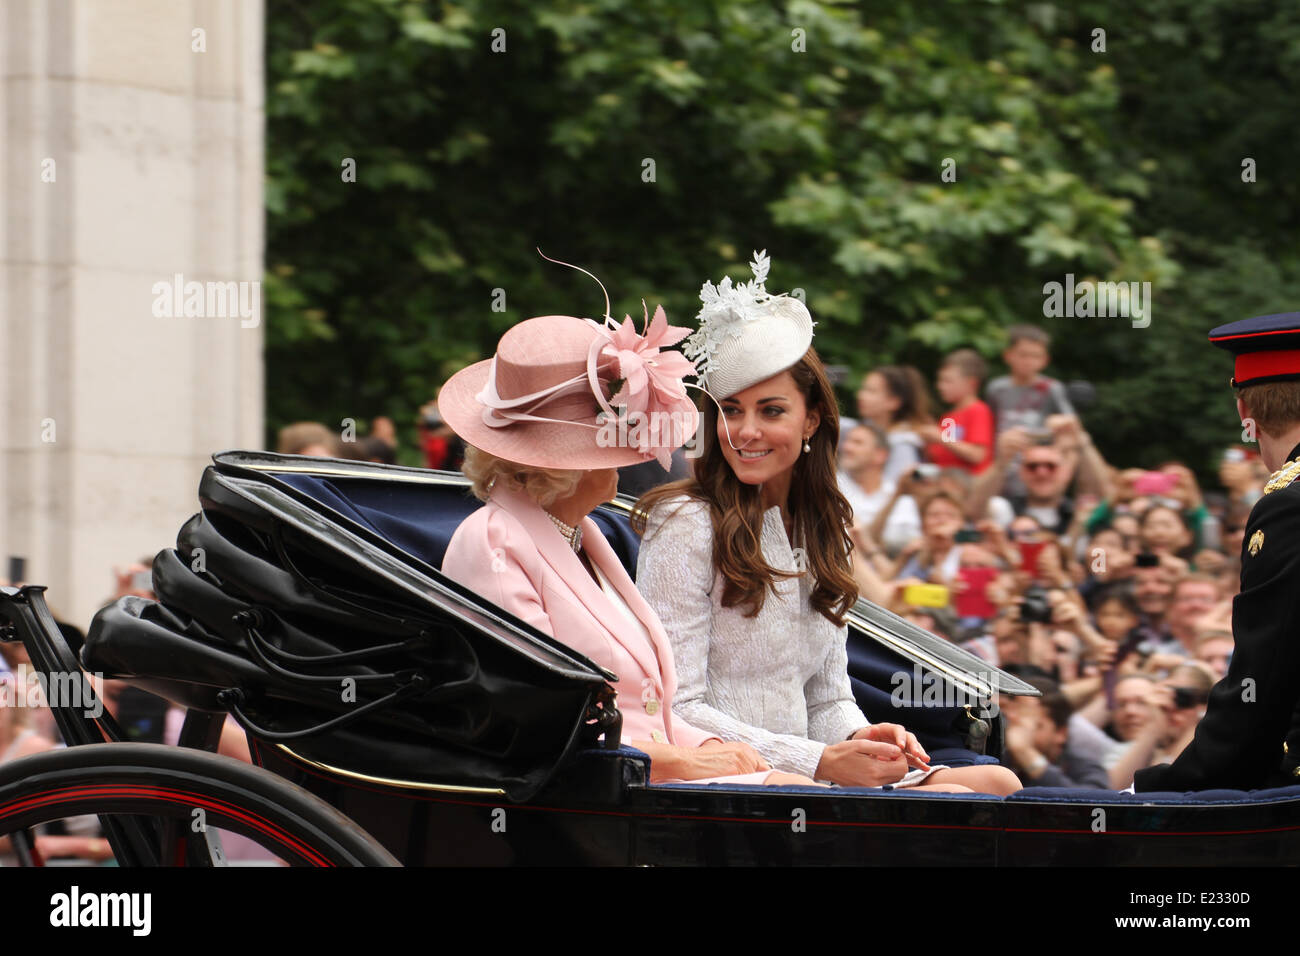 London, UK. 14th June 2014. ​Members of the Royal Family seen on horse drawn carriages Credit:  david mbiyu/Alamy Live News Stock Photo